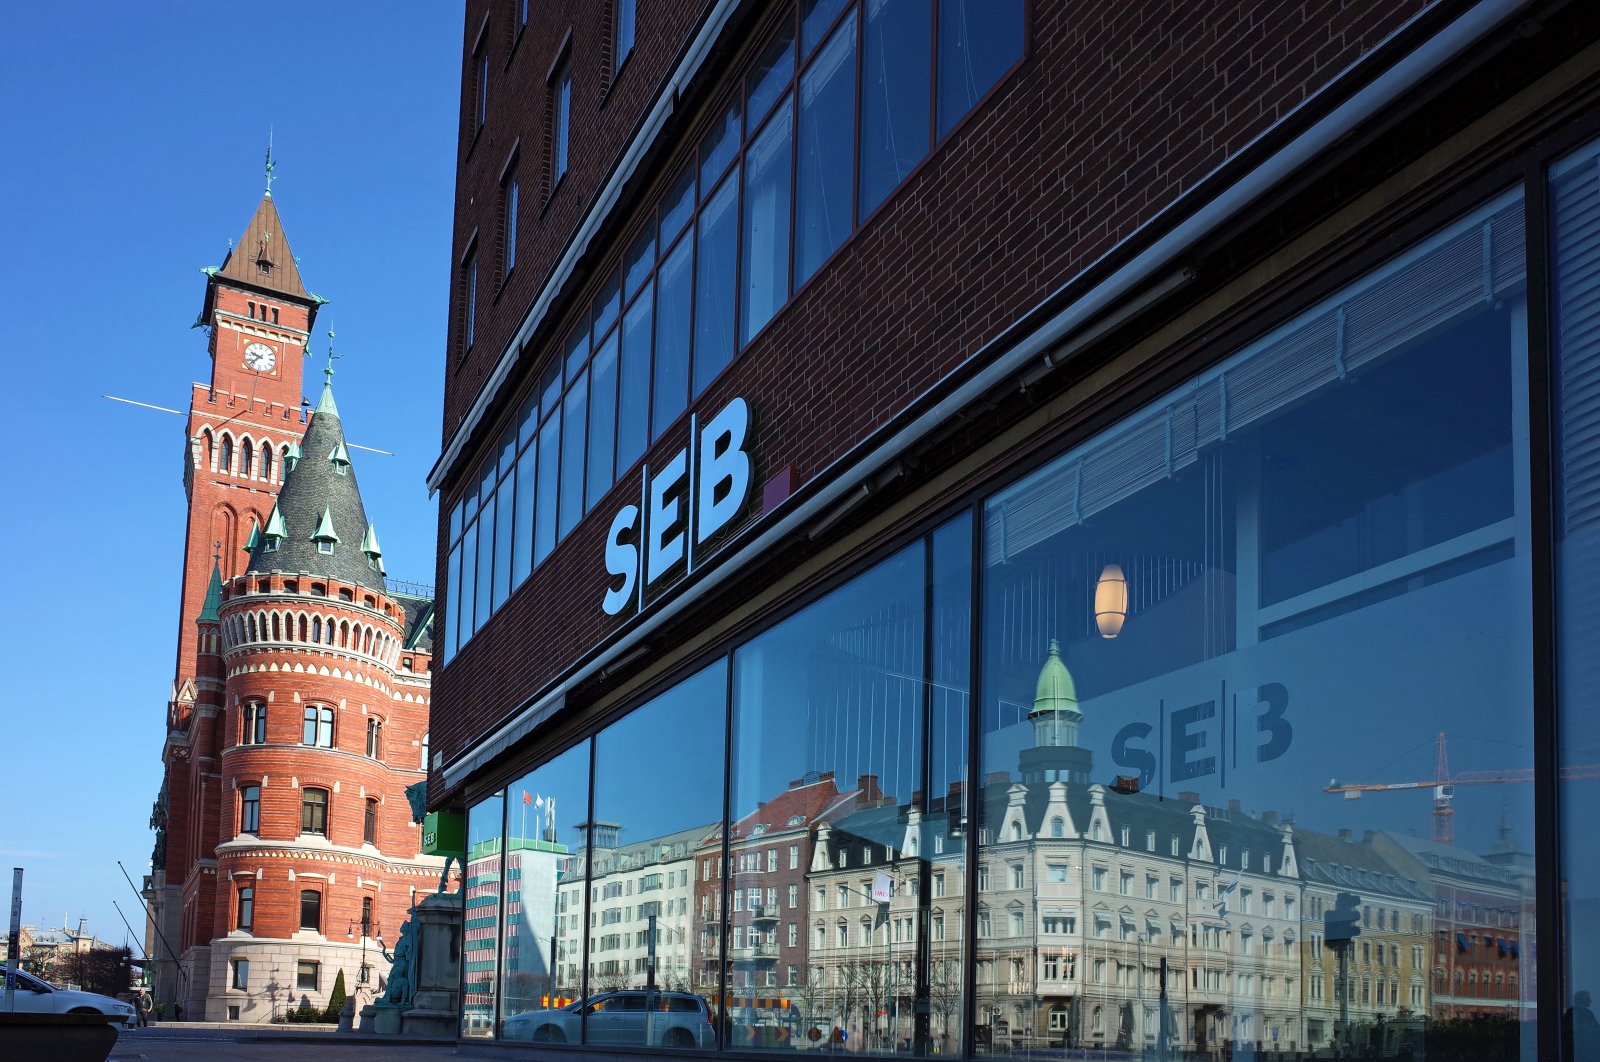 The SEB bank building on Jarnvagsgatan Street with the clock tower of Town Hall in the background, Helsingborg, Sweden. April 14, 2018. (Shutterstock Photo)